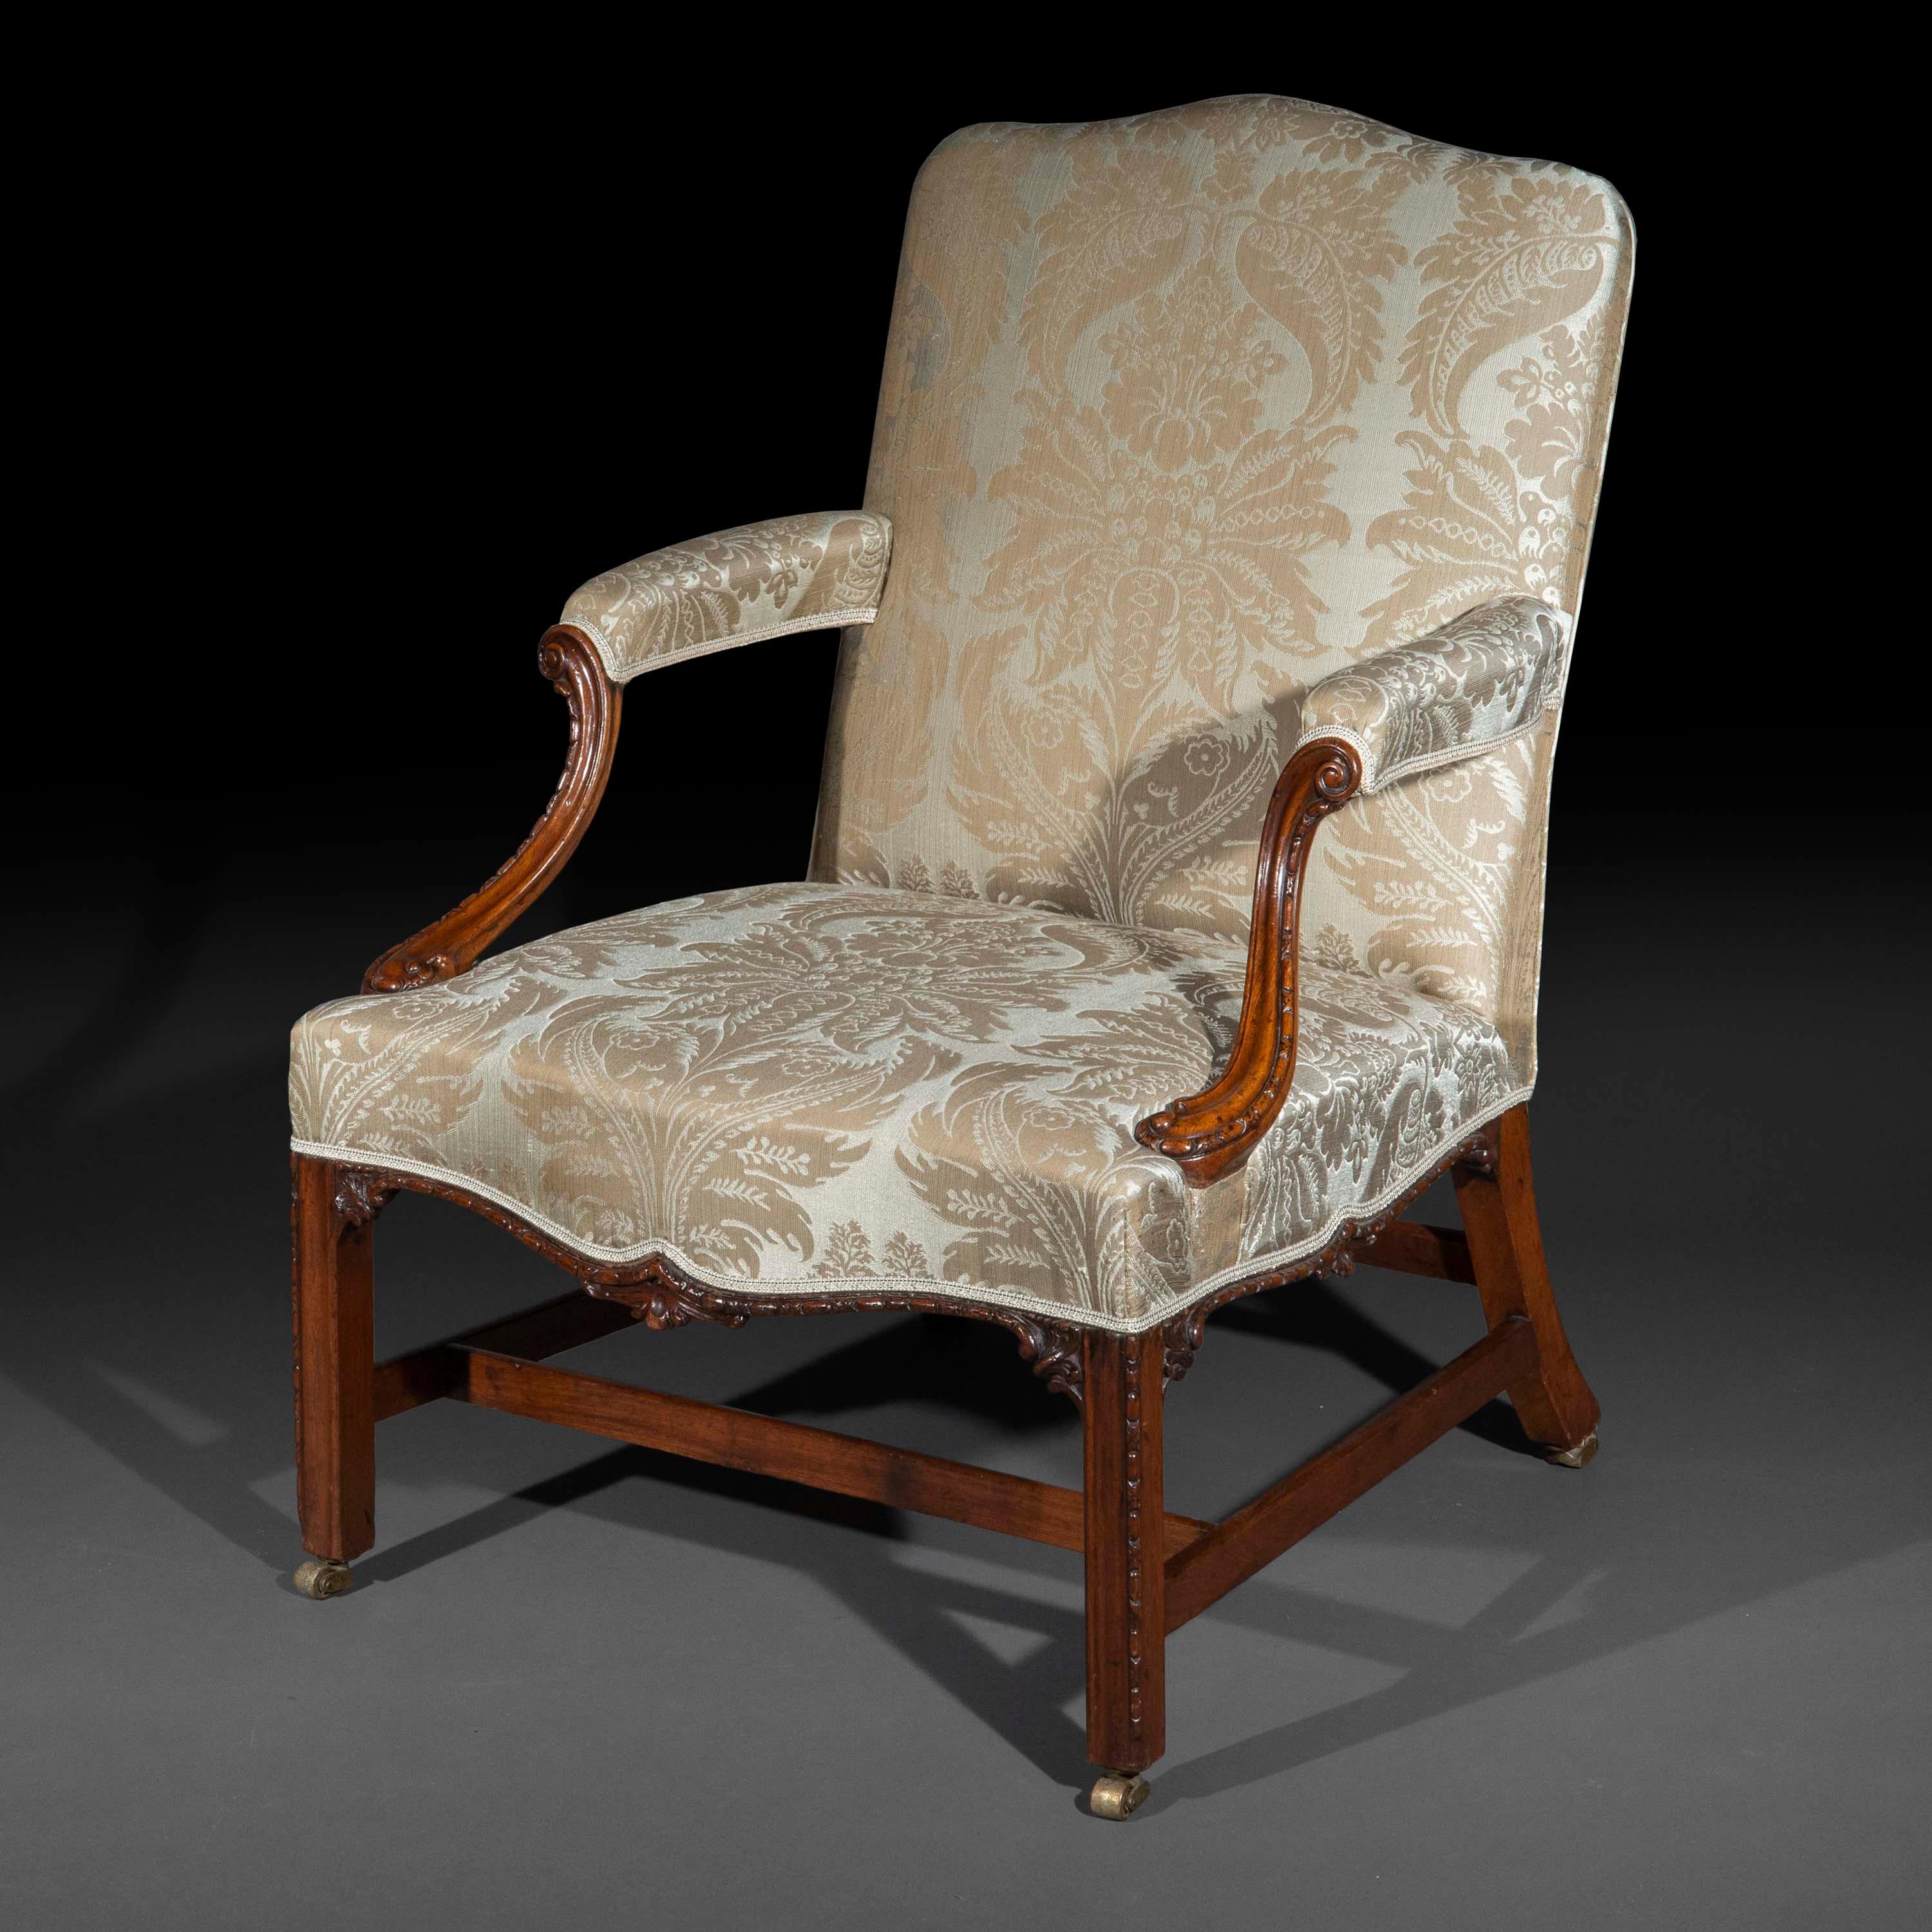 Upholstery Large English Chippendale Gainsborough Armchair, mid-18th Century For Sale